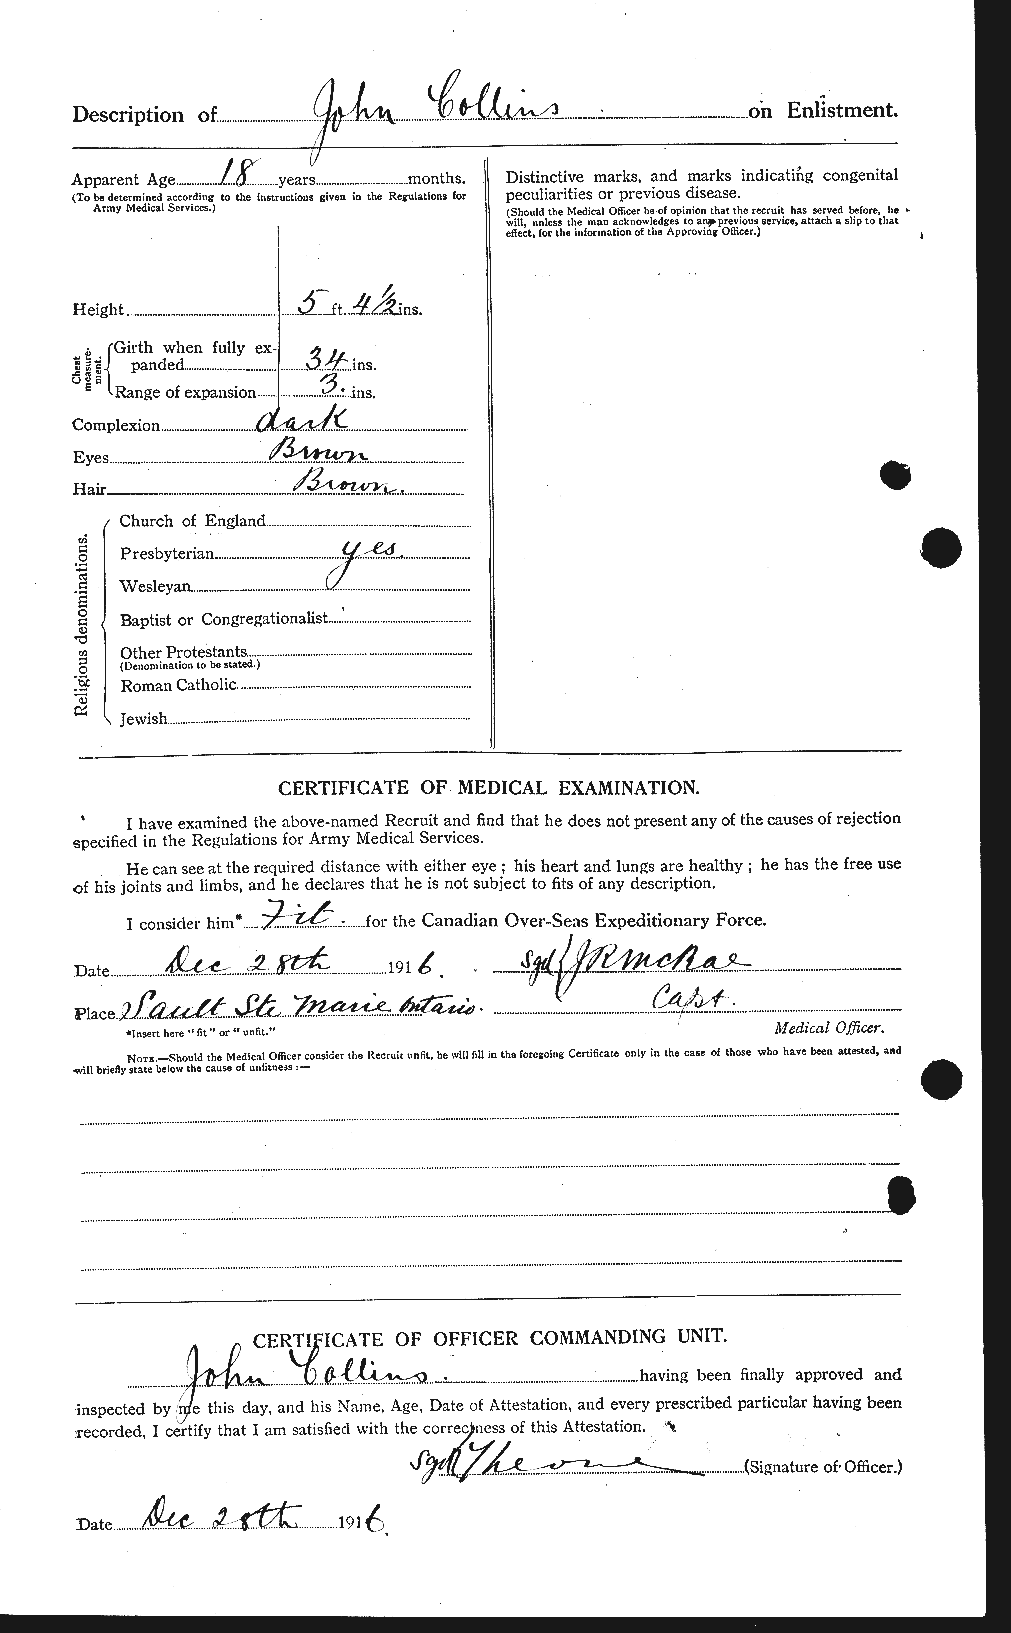 Personnel Records of the First World War - CEF 069795b